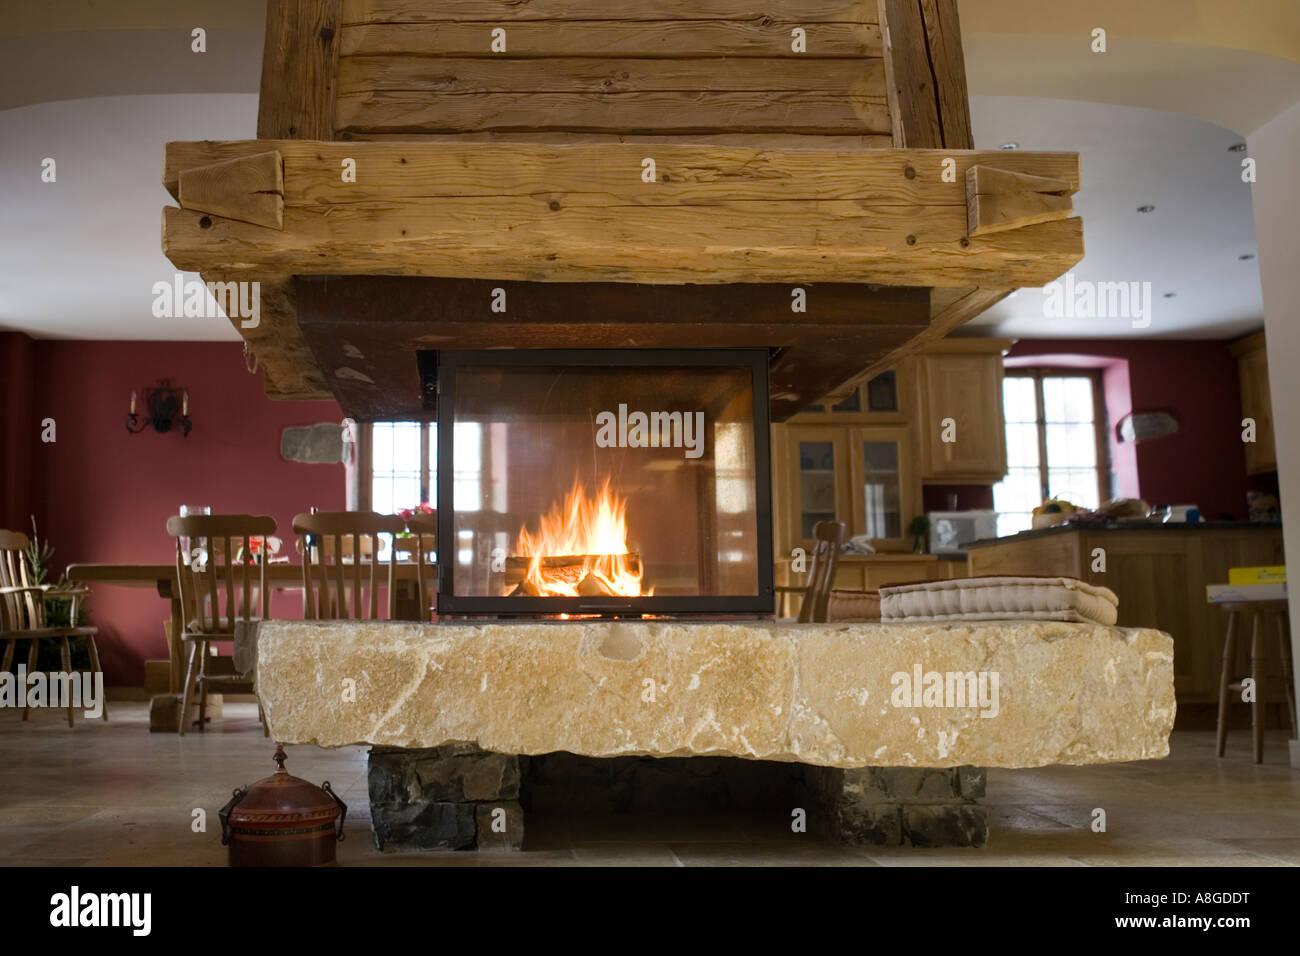 Fireplace and chimney in chalet Haute Savoie Rhone Alpes France Stock Photo